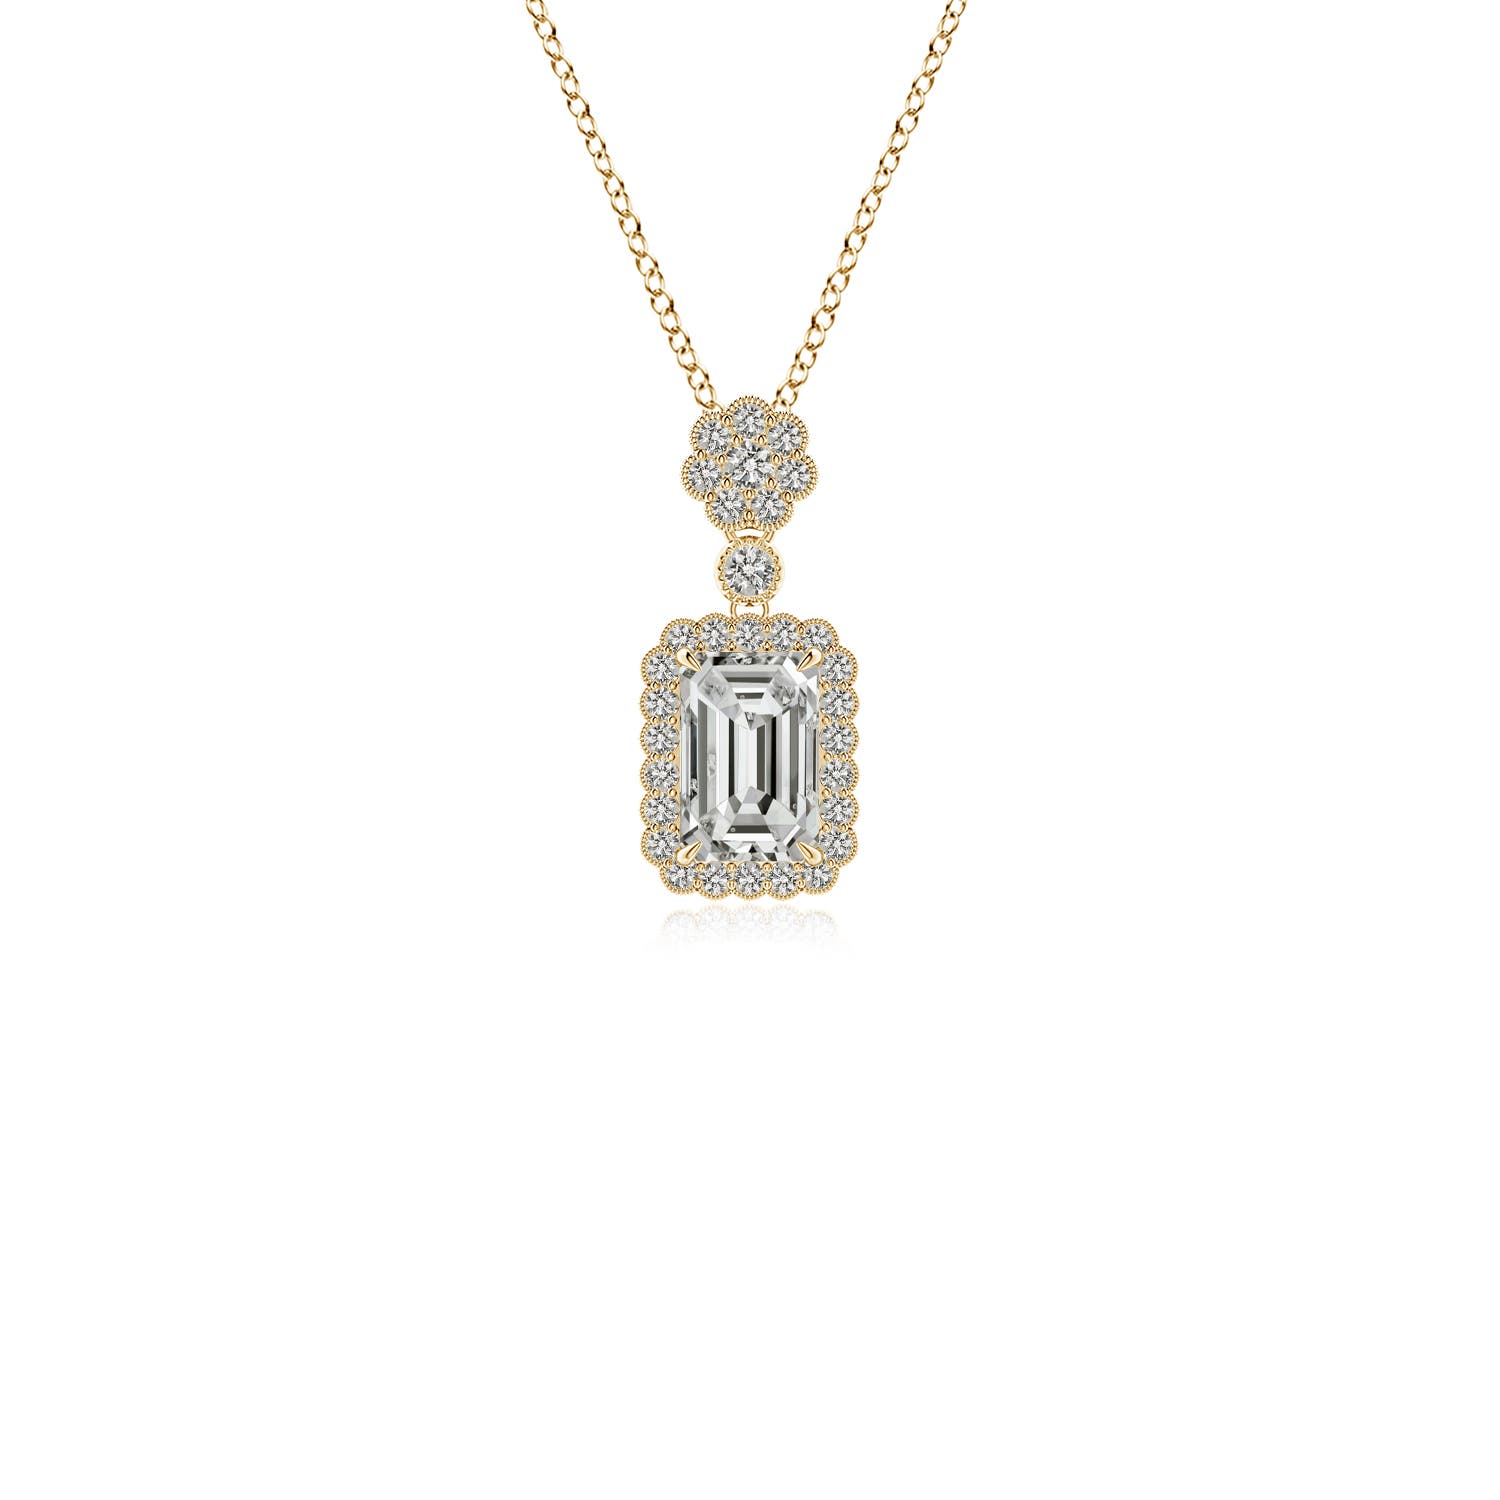 K, I3 / 0.78 CT / 14 KT Yellow Gold